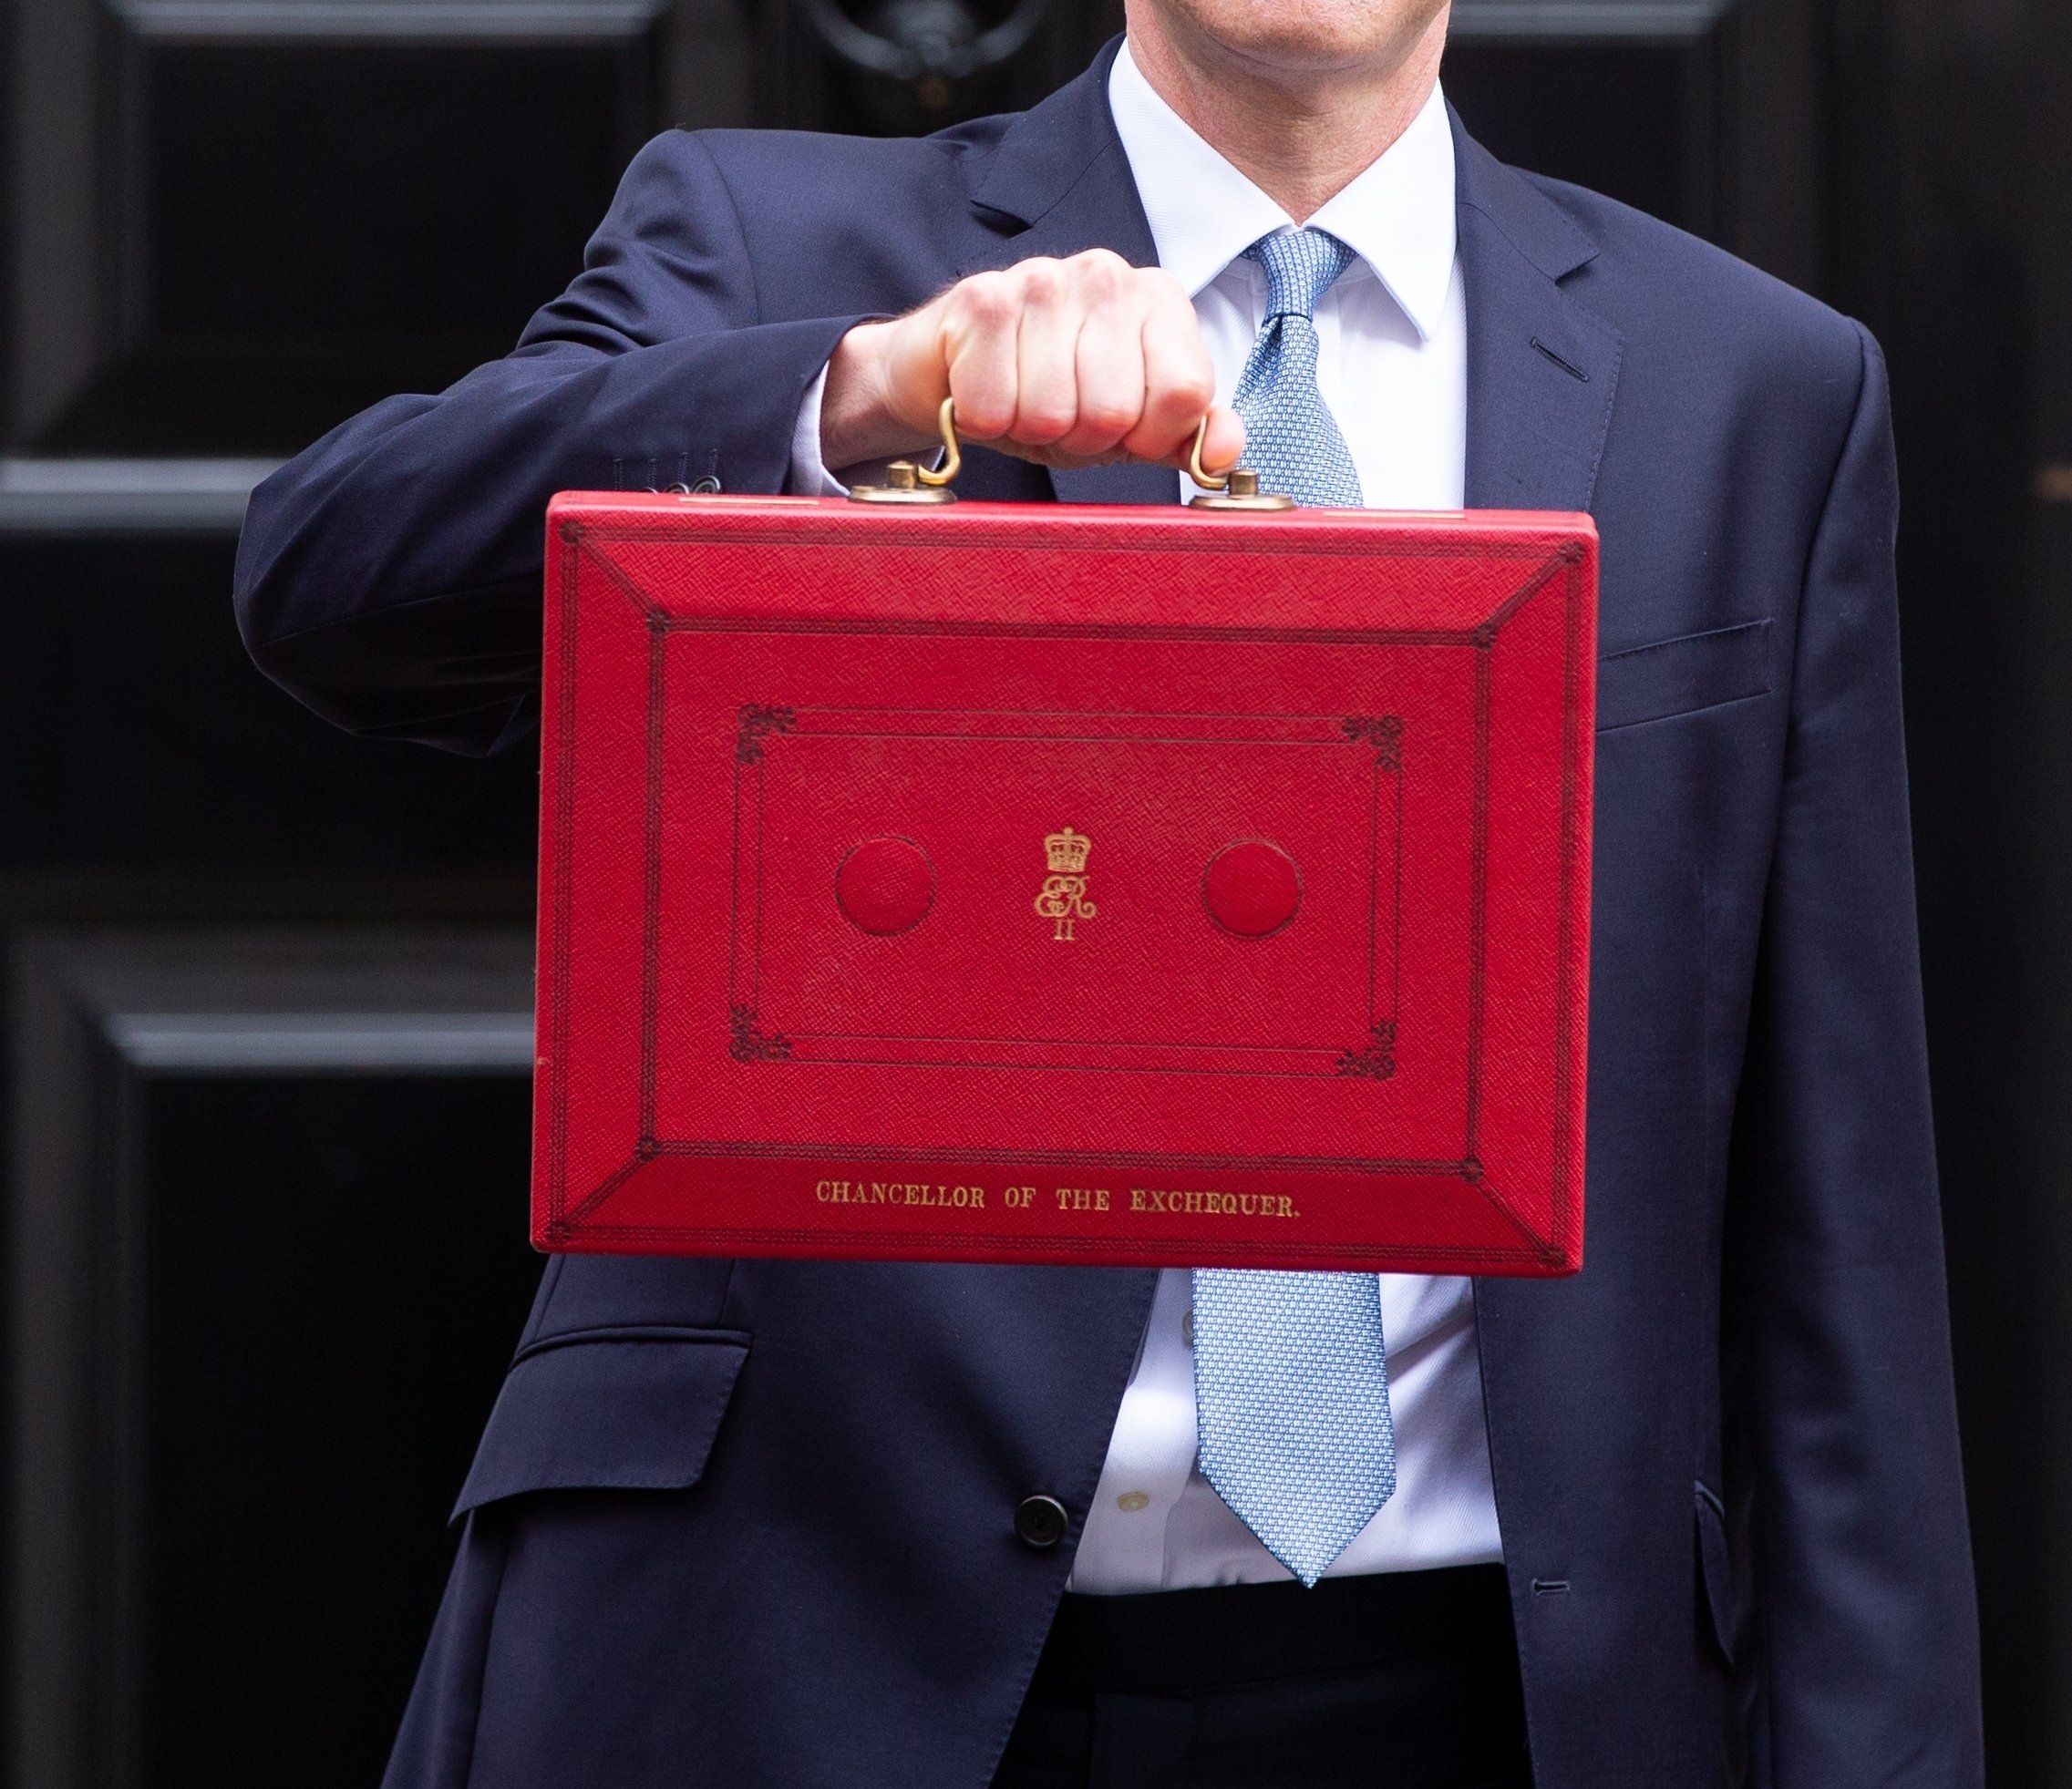 2023/24 Budget Jeremy Hunt with red suitcase 